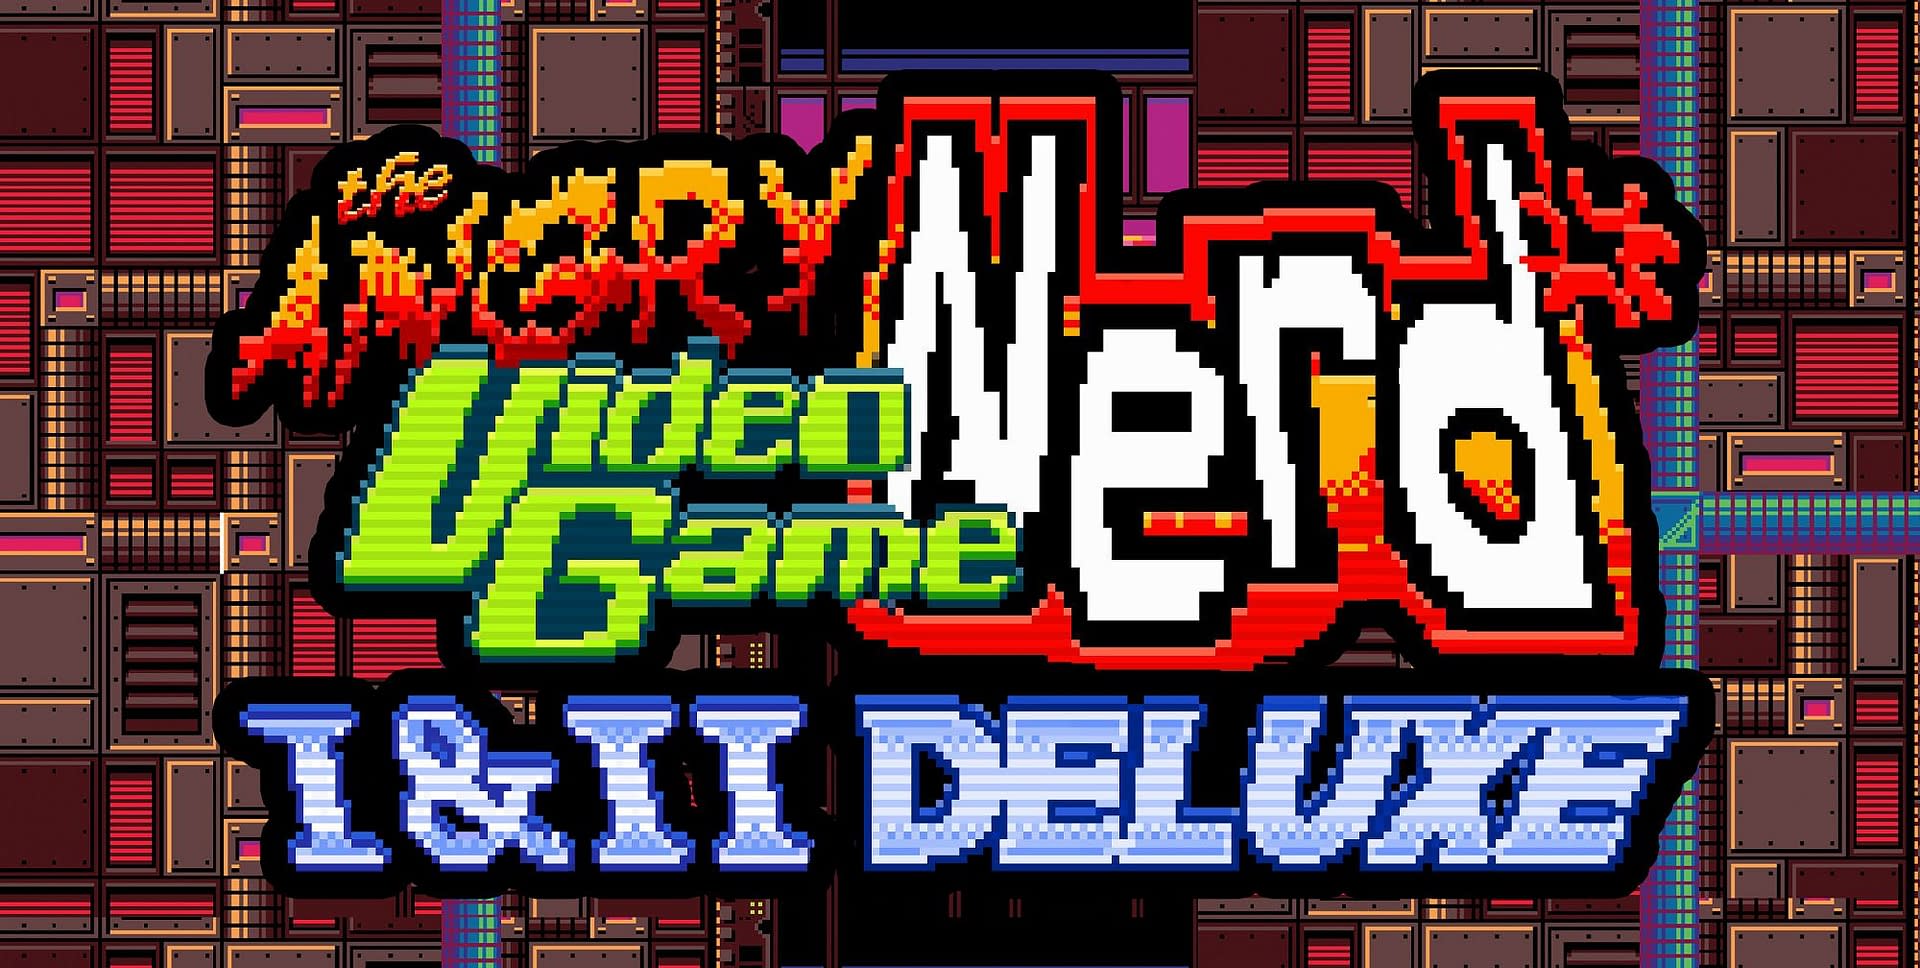 Angry Video Game Nerd I & II Deluxe Is Now Available For Digital